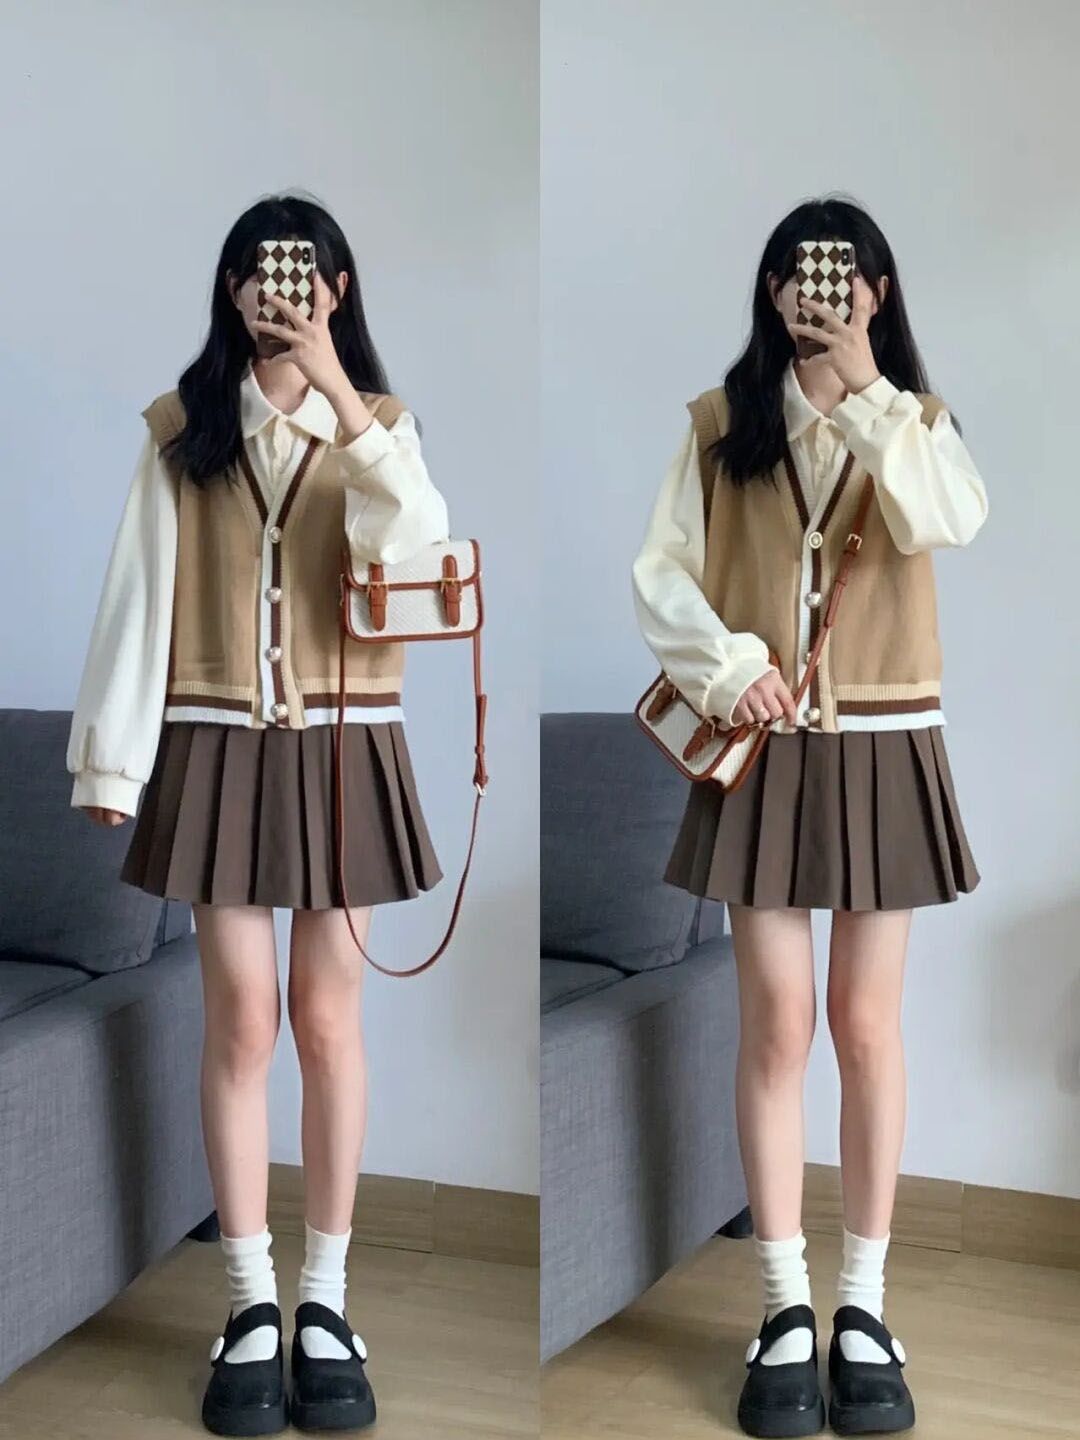 College style autumn suit female 2022 new western style age-reducing thin shirt knitted vest pleated skirt three-piece set